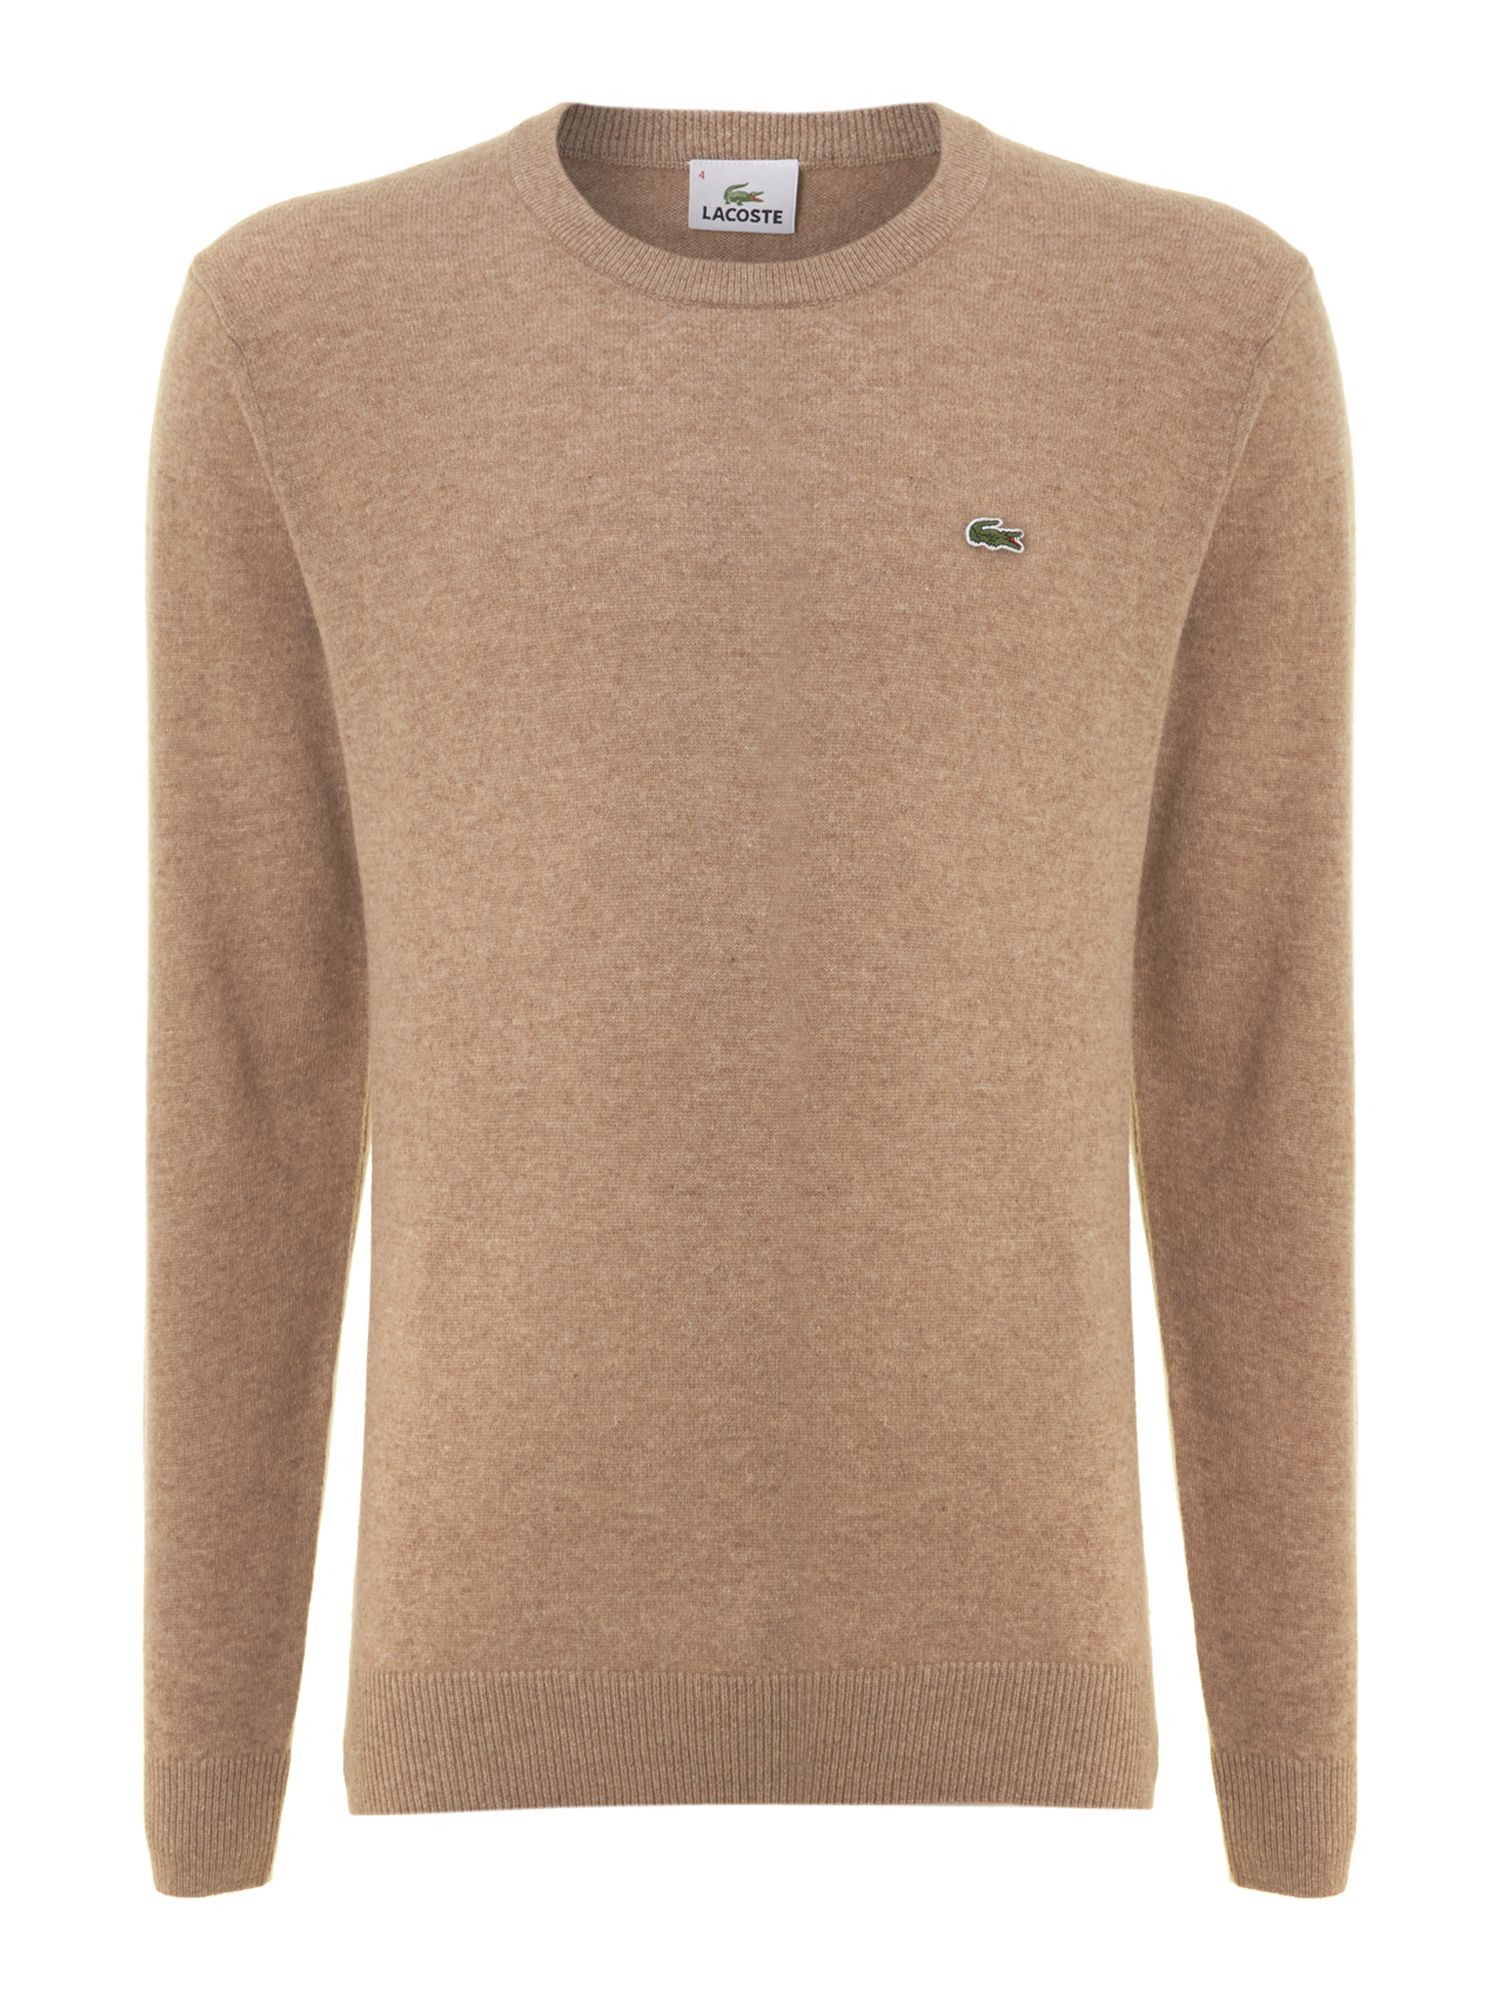 Lacoste Crew Neck Wool Sweater in Brown for Men (Light Brown) | Lyst